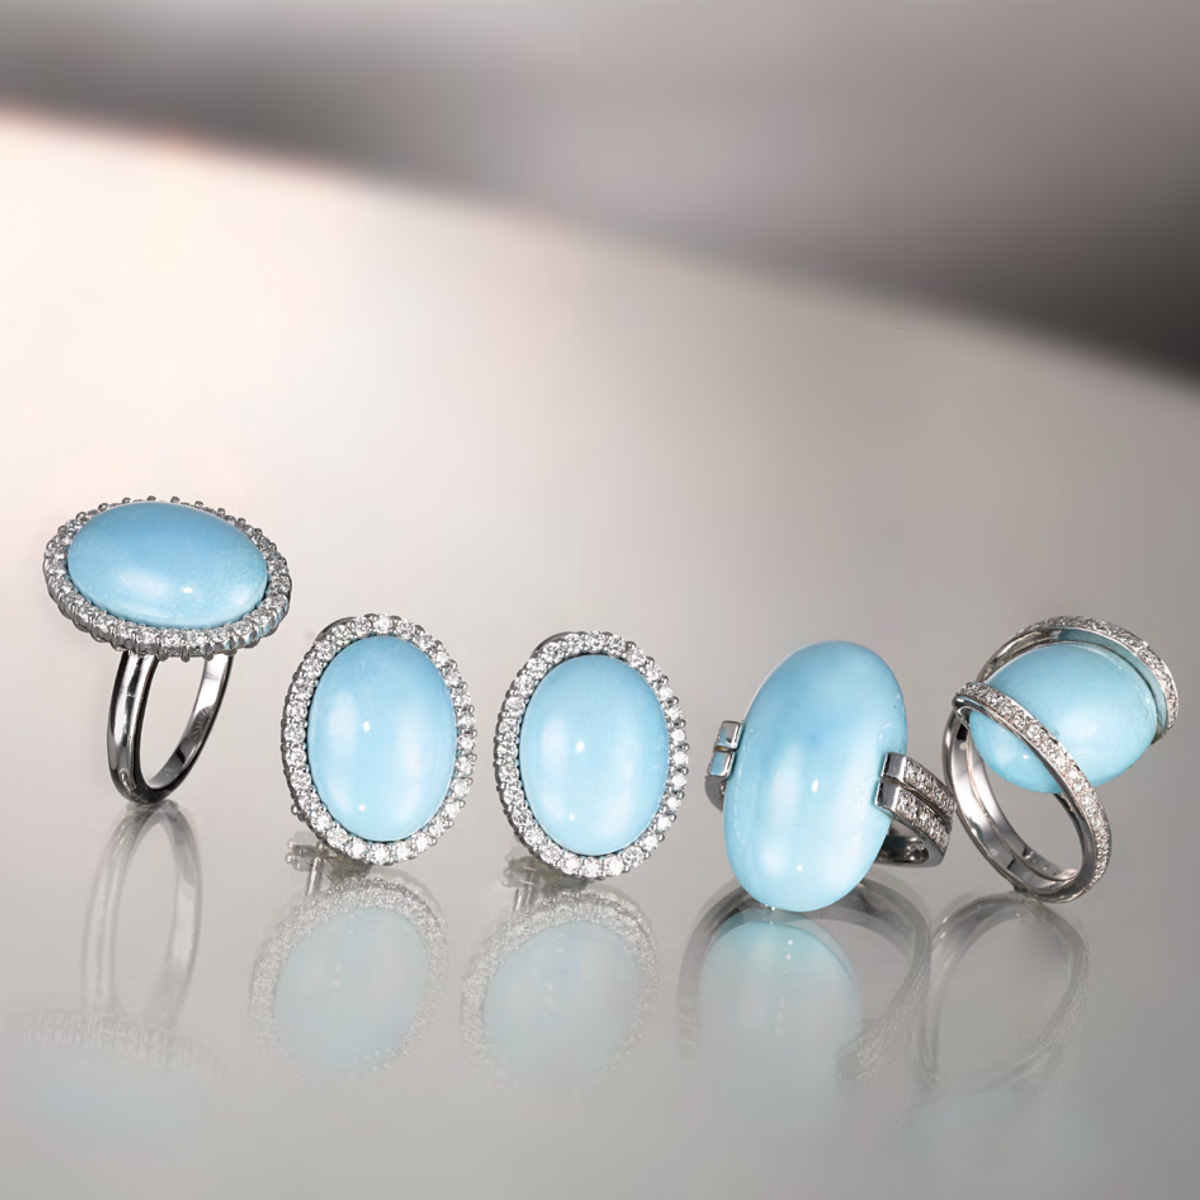 Anelli Turchese - Turquoise rings